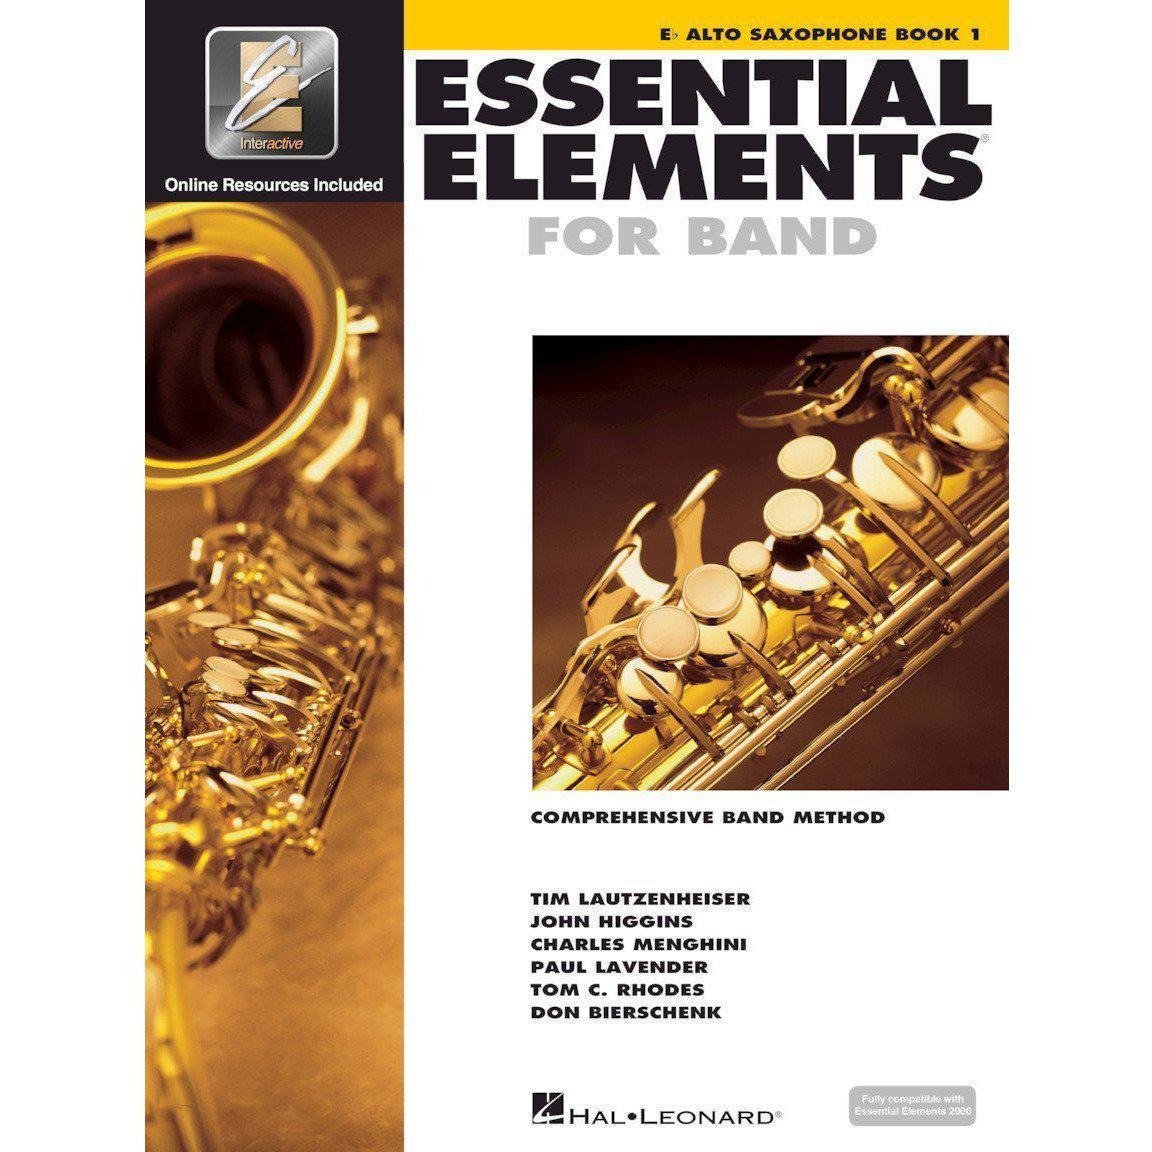 Essential Elements for Band Book 1-Eb Alto Saxophone-Andy's Music